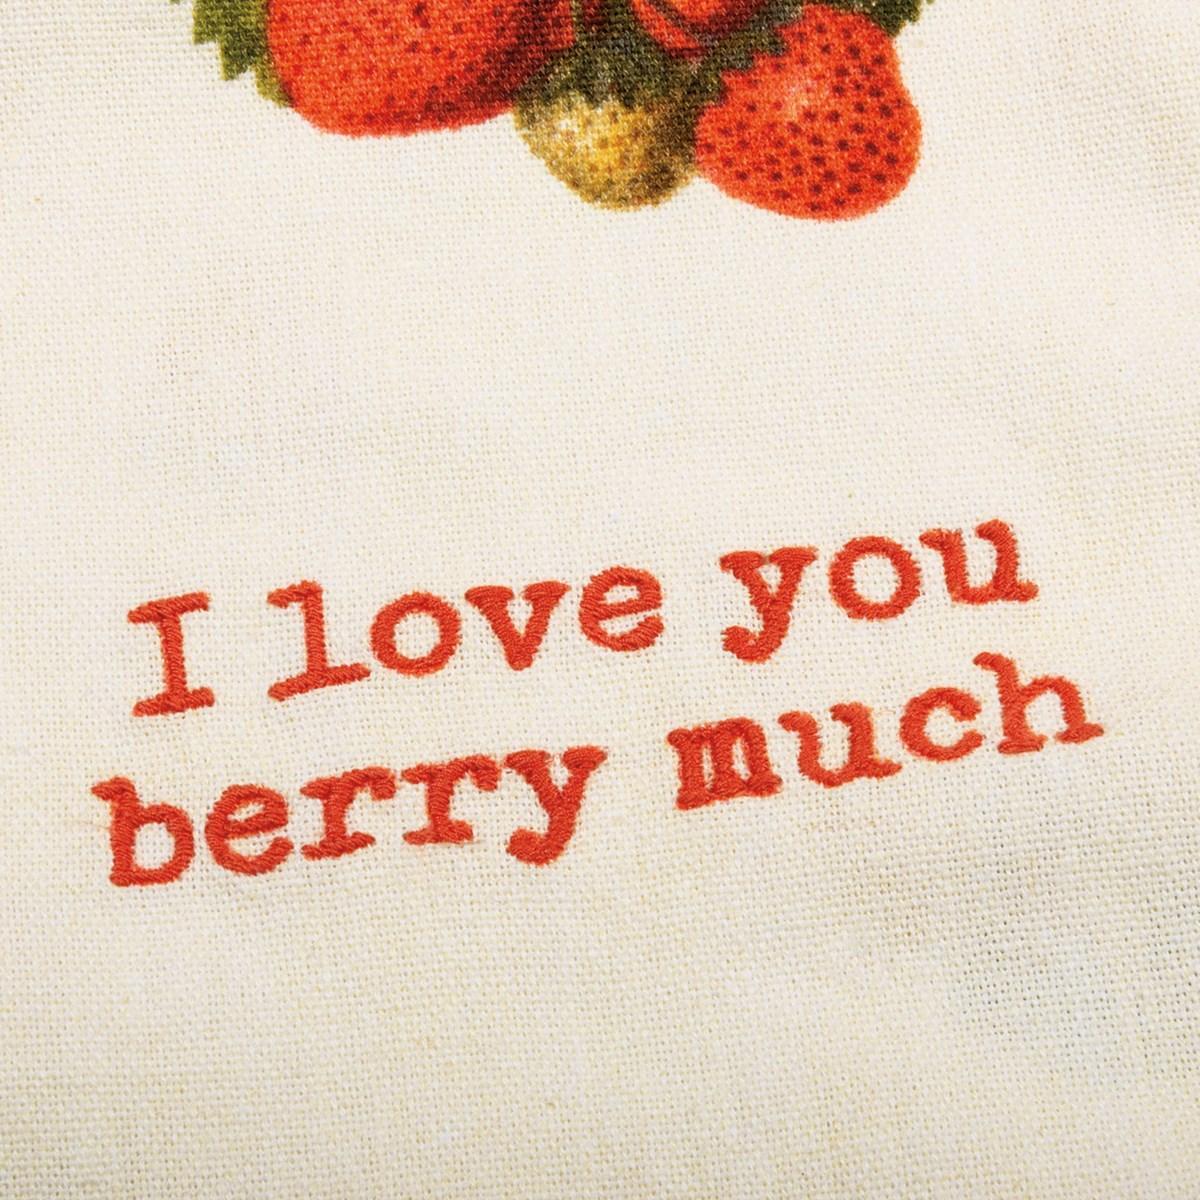 Kitchen Towel | I Love You Berry Much